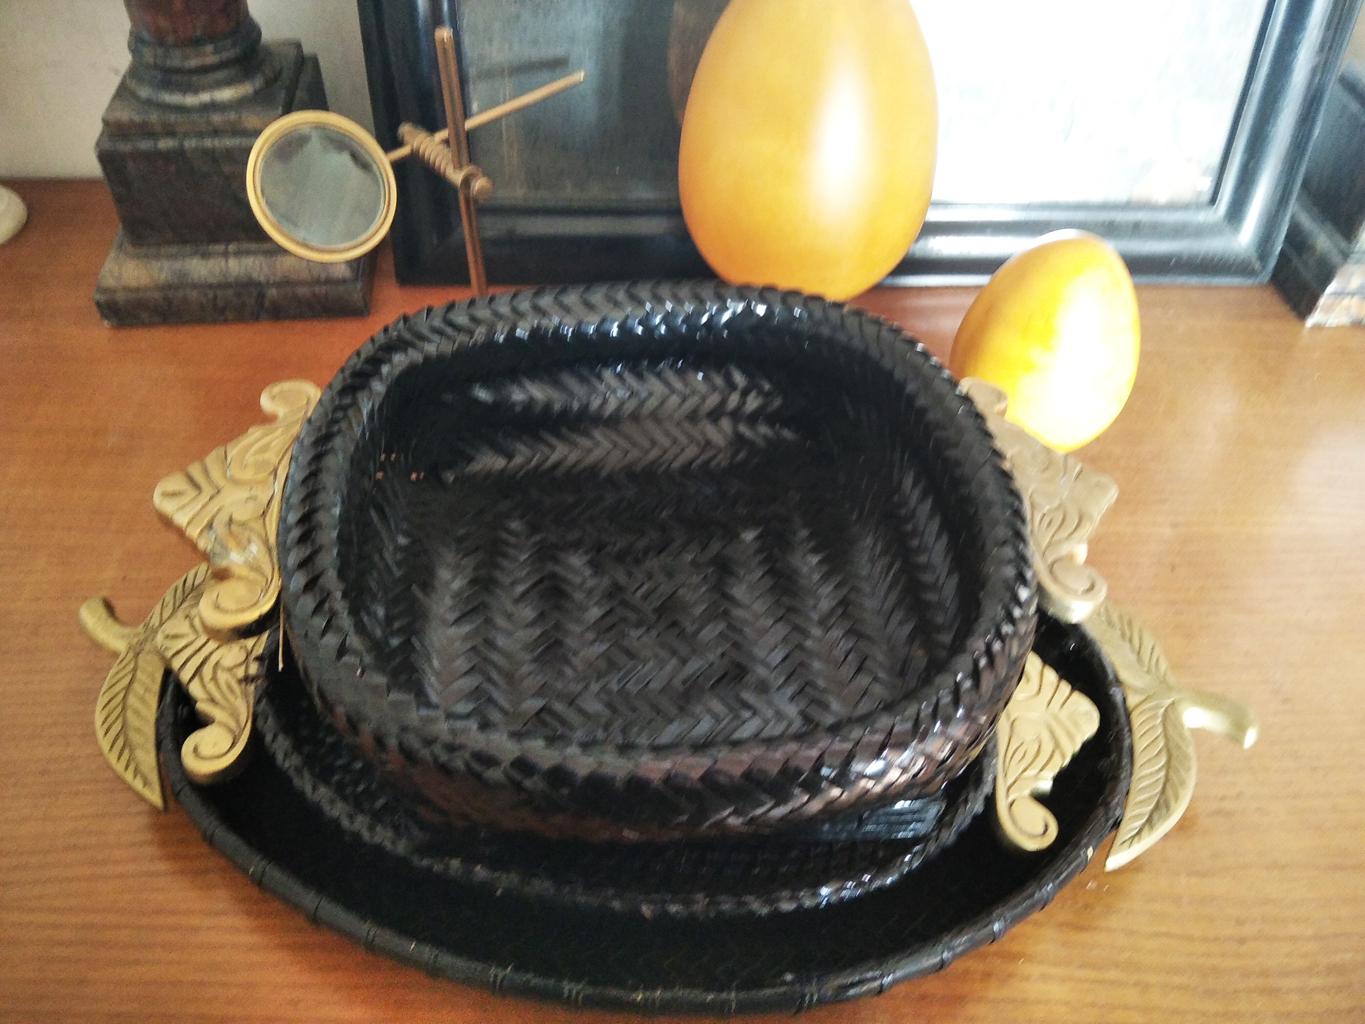 Trays Black Rattan and Brass Handles Oriental Origin 3 Pieces, Mid 20th Century For Sale 7